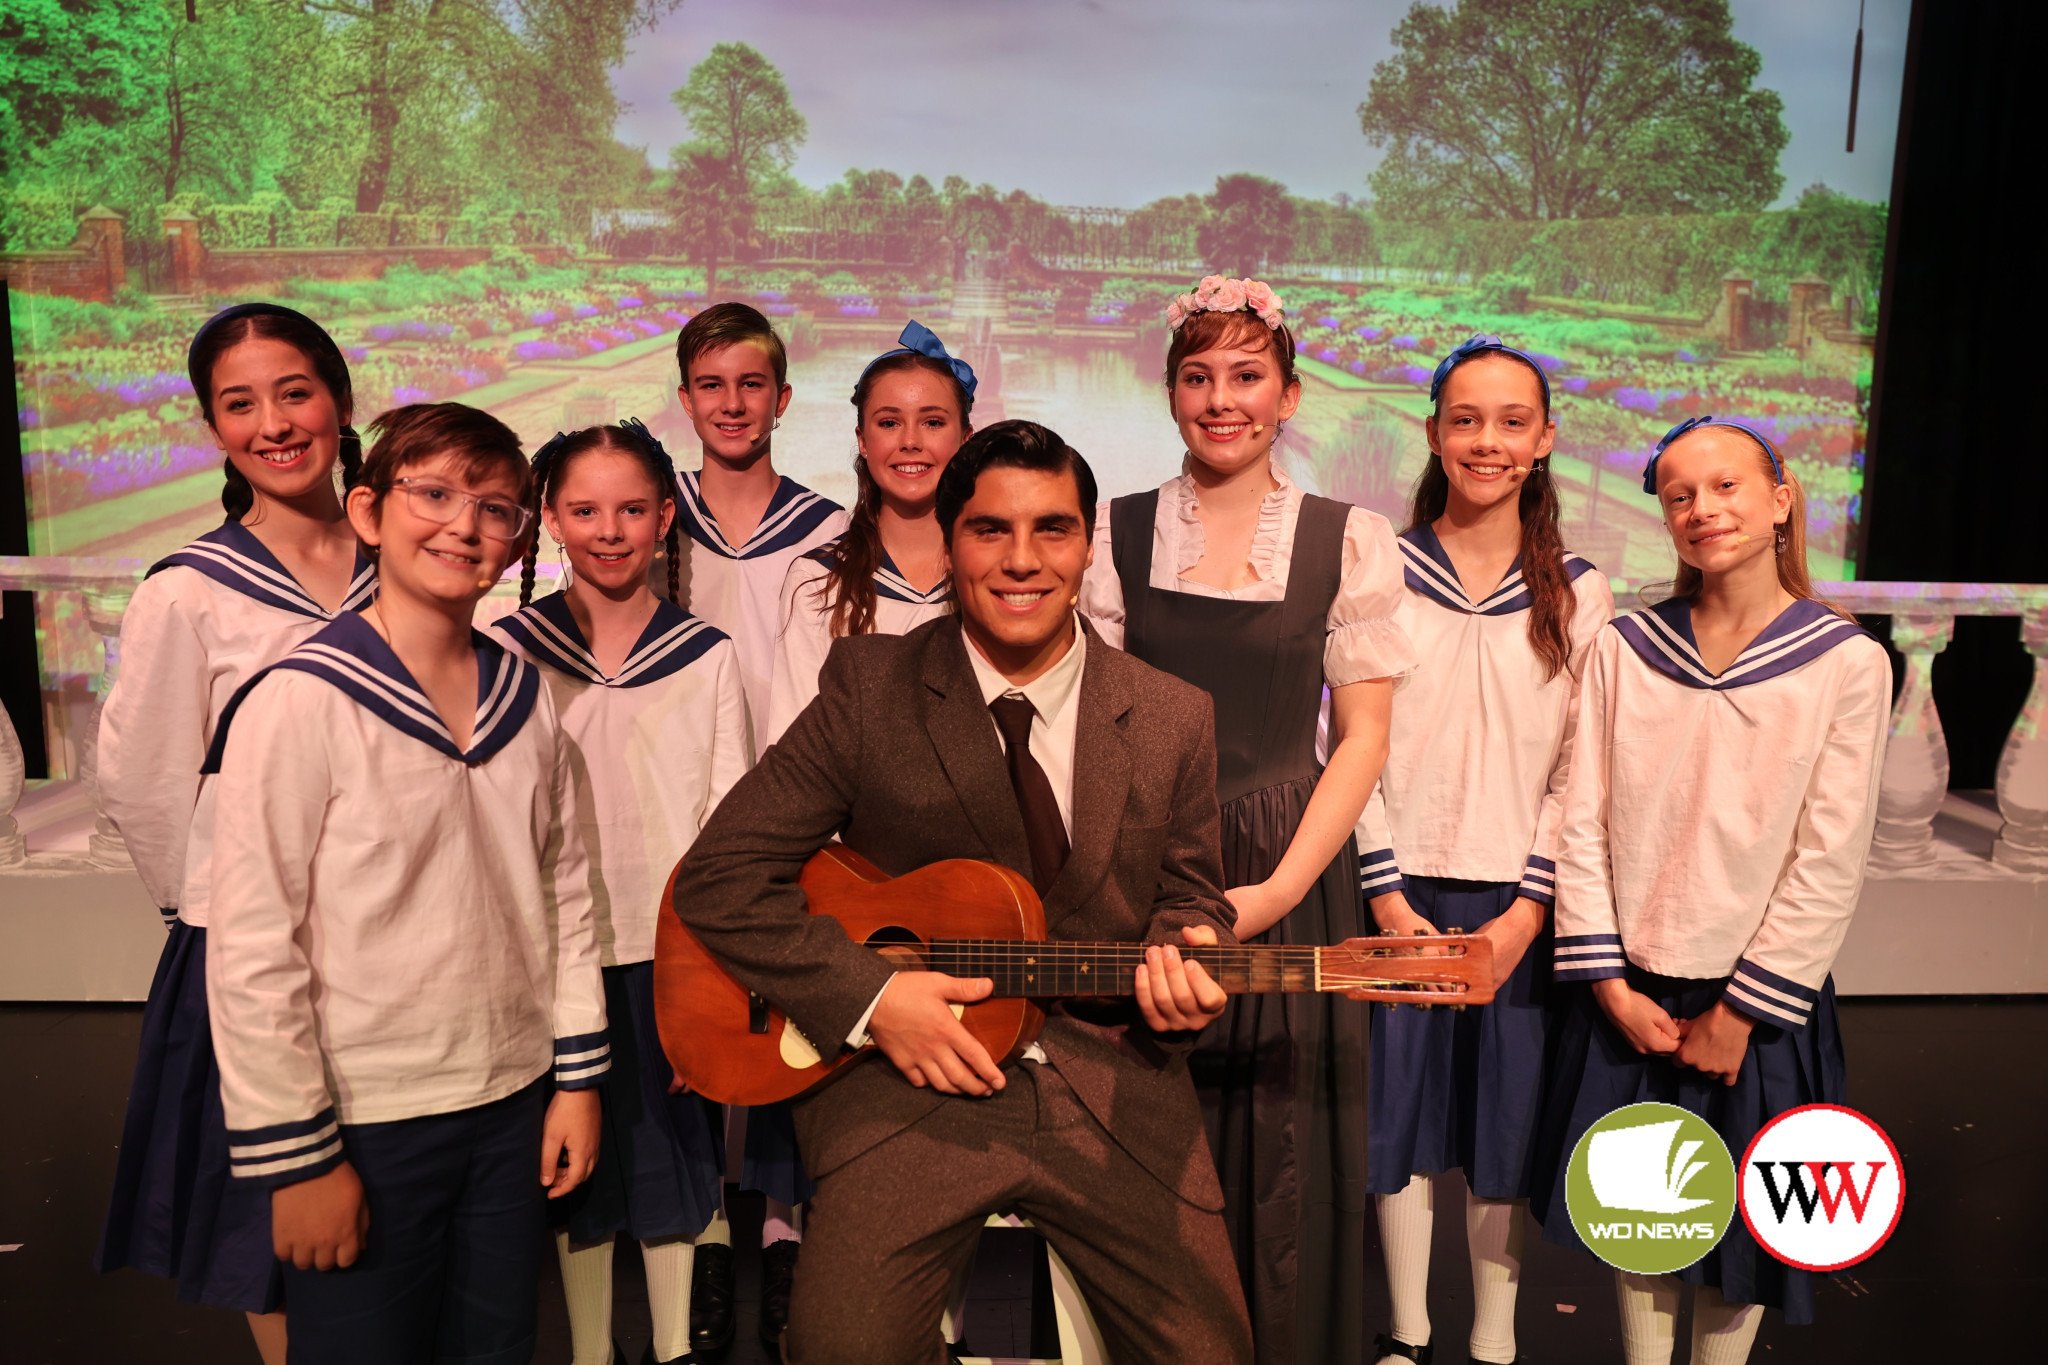 Students from Emmanuel College will take to the stage tonight (Friday) for the first of four performances of ‘The Sound of Music’ this weekend. One of the most well-known musicals of all time, the production features such beloved songs as ‘Edelweiss,’ ‘My Favourite Things’ and ‘Sixteen going on Seventeen.’ Don’t miss your chance to see these talented teens on stage, including Flynn El-Hage (Captain Von Trapp) and Ruby Nelson (Maria) and the young Von Trapp children.